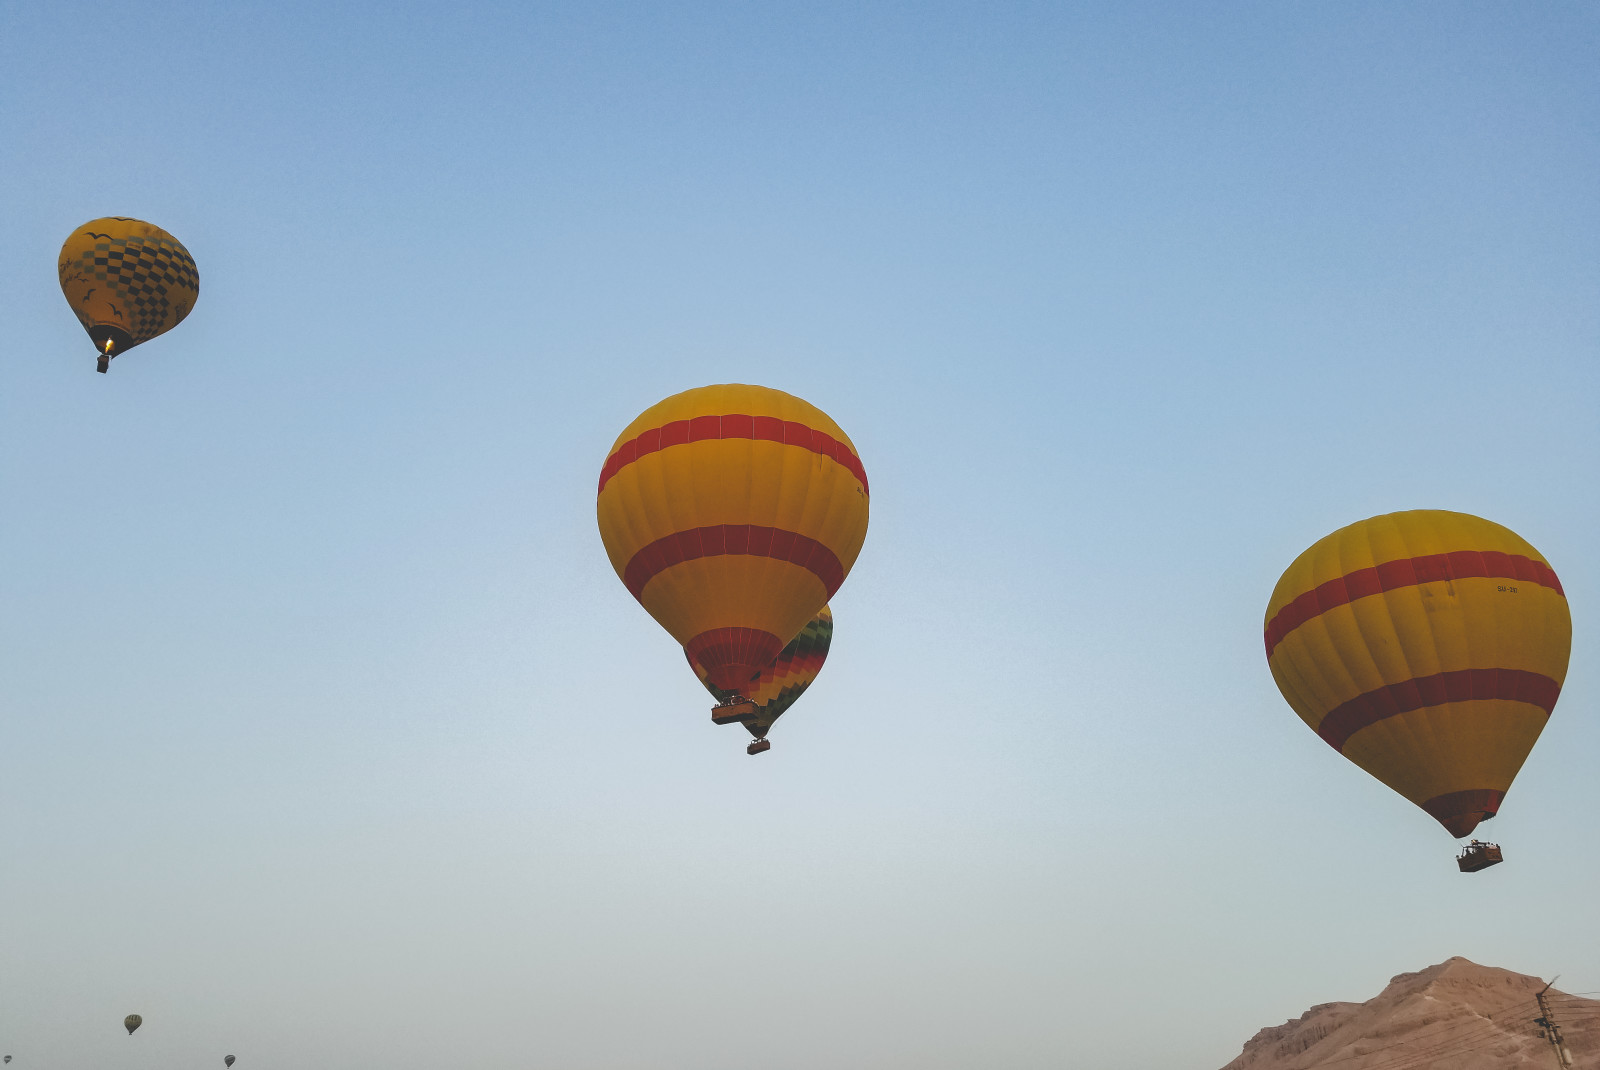 Yellow and red hot air balloons in the sky during daytime